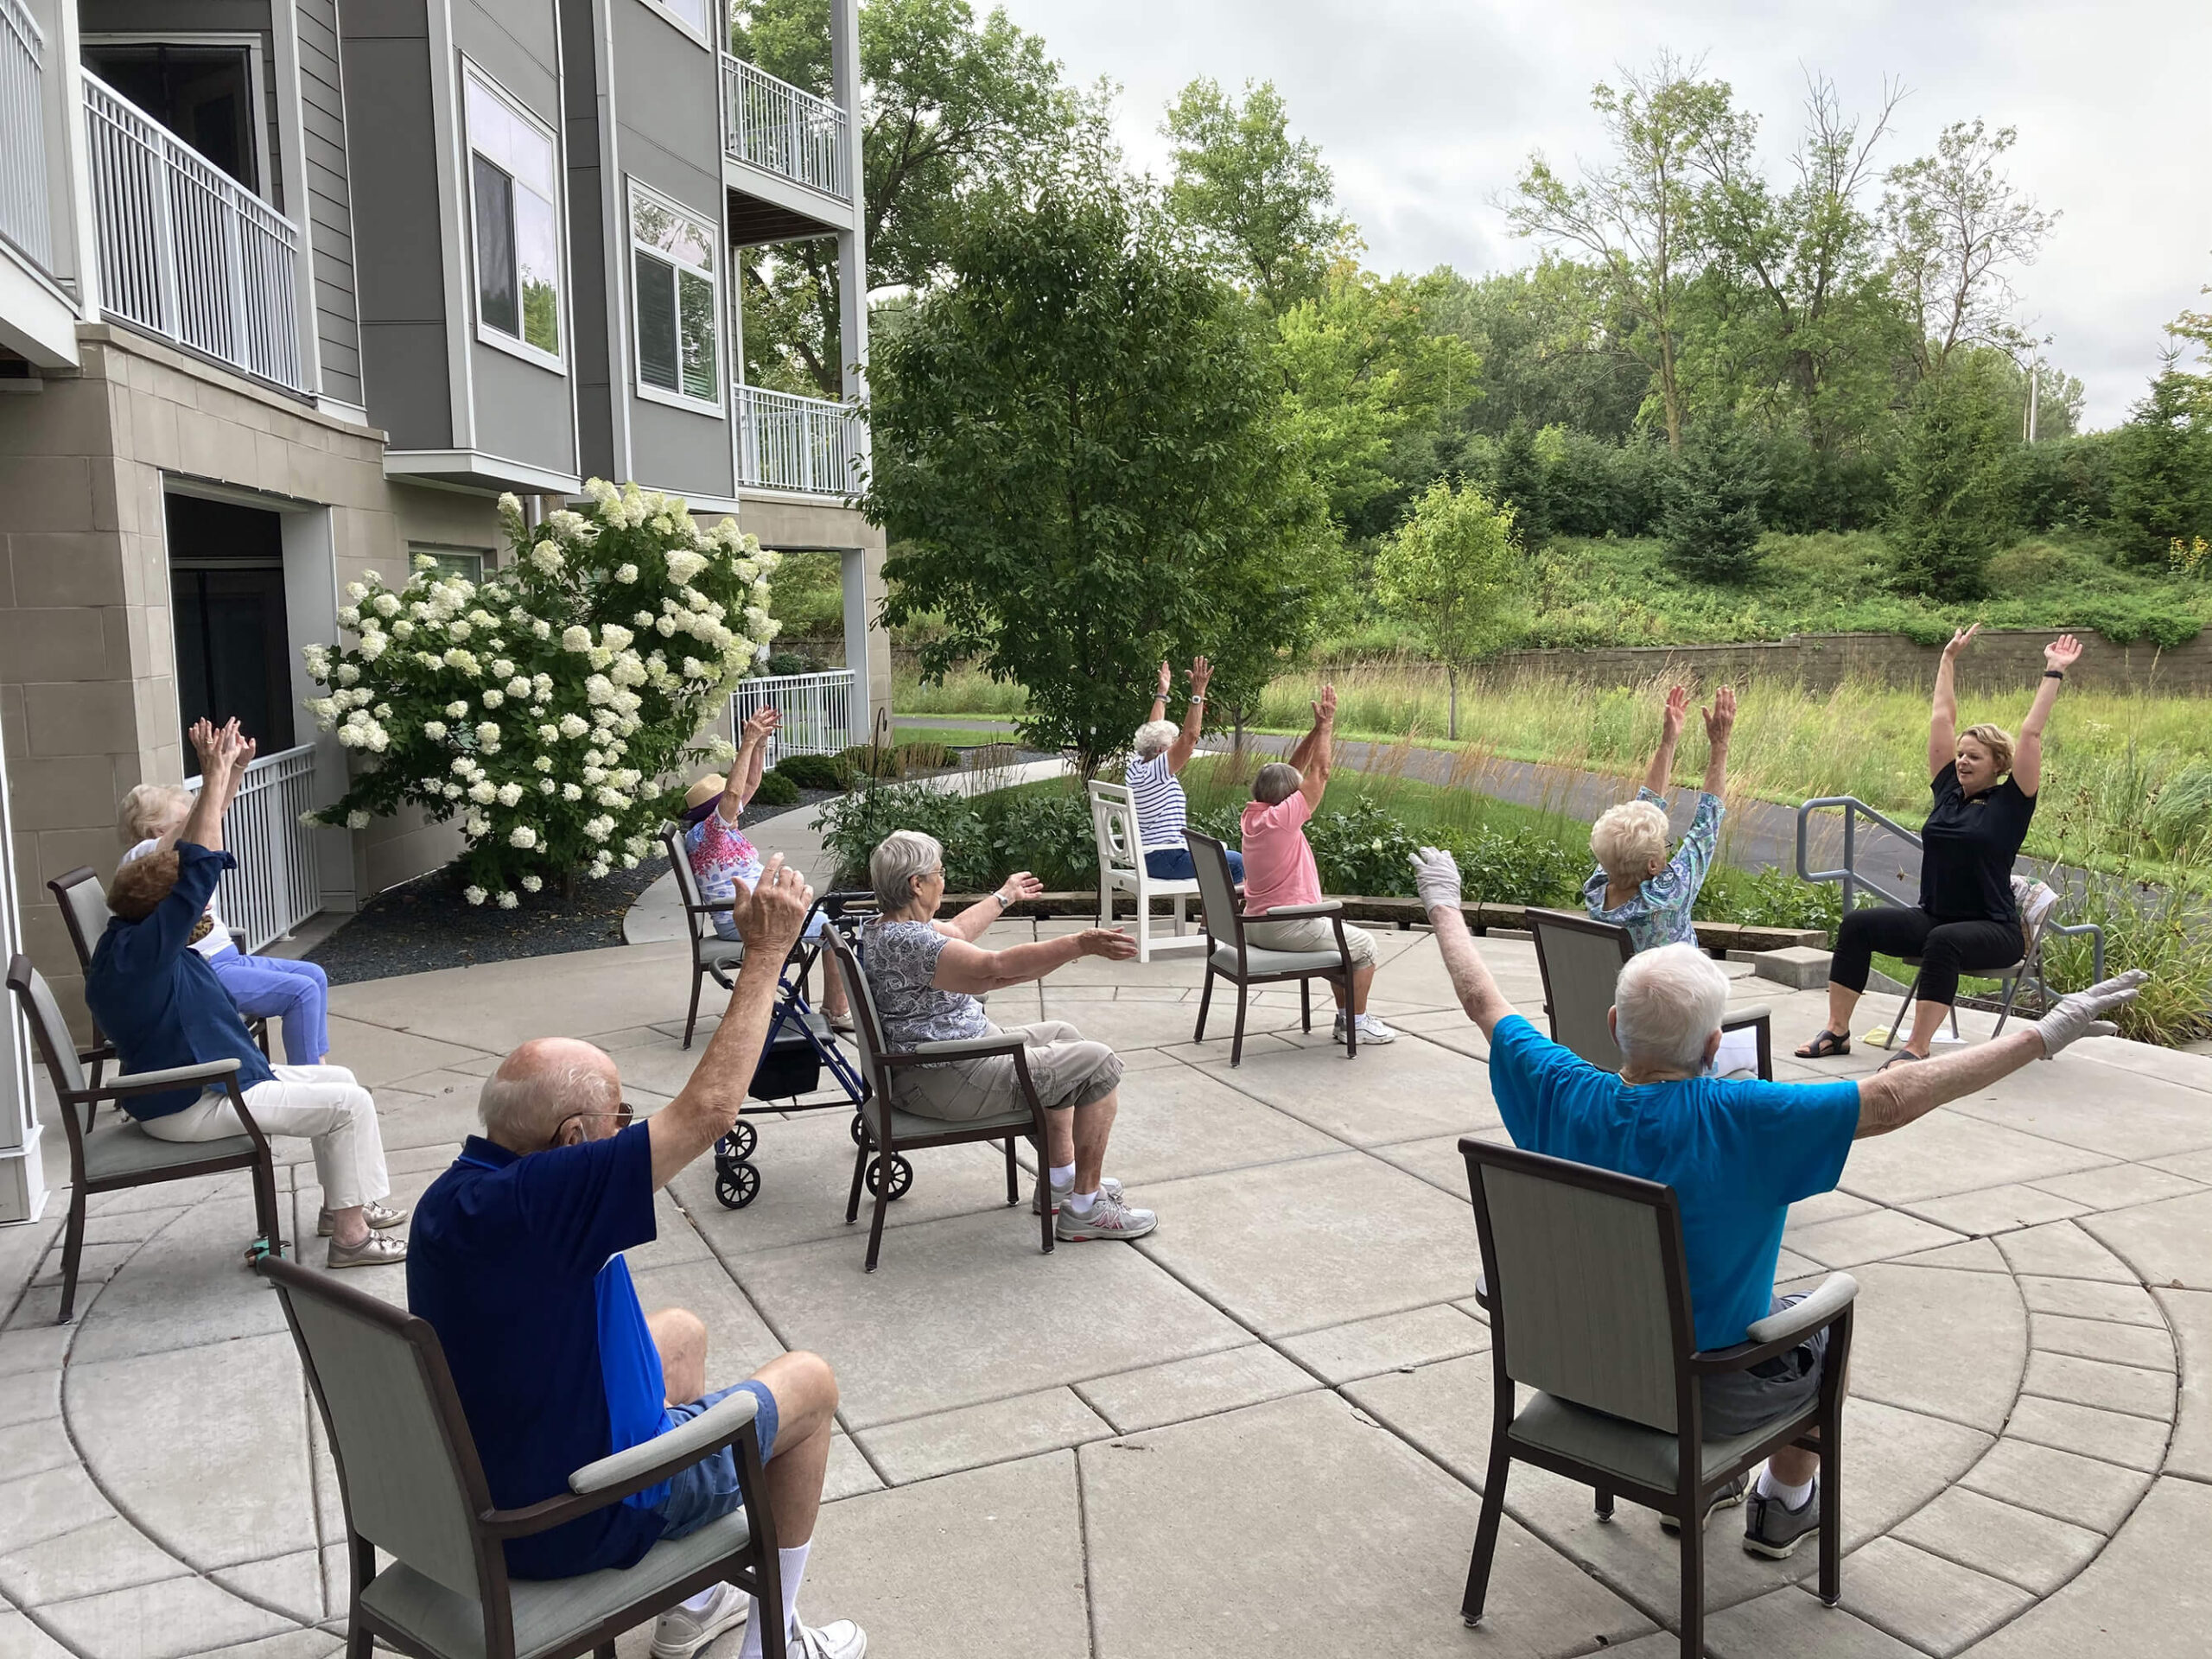 Seniors engaging in outdoor chair exercises with enthusiasm in Edina, Minnesota community.